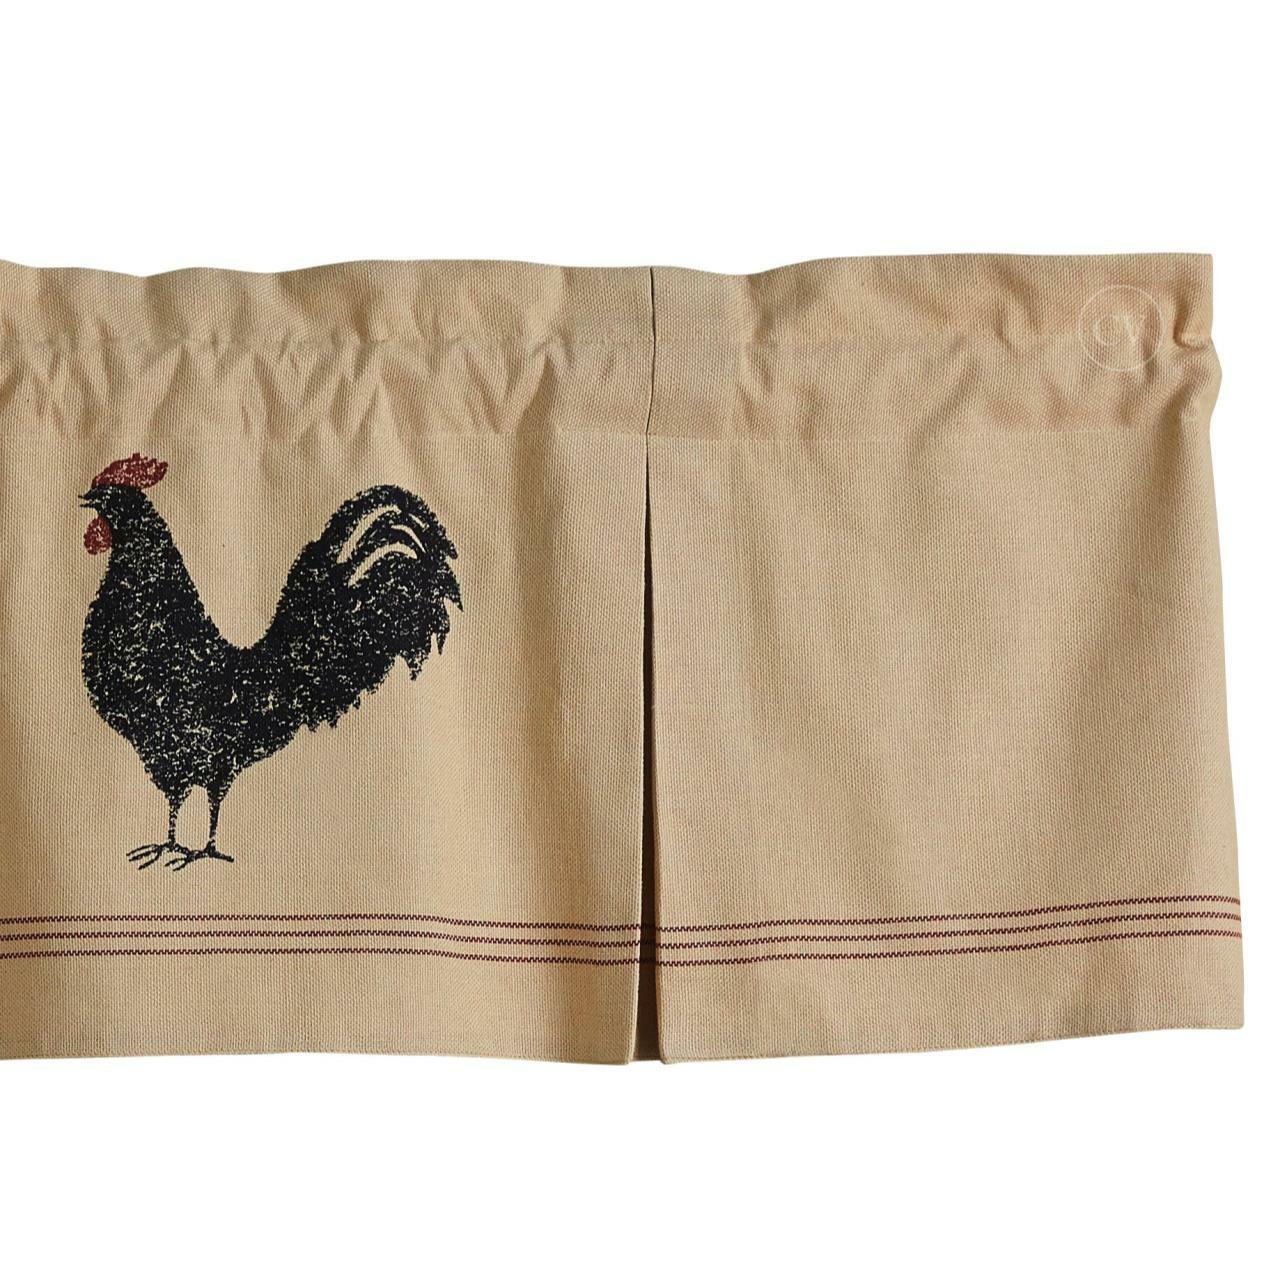 Hen Pecked Valance - Pleated Park designs